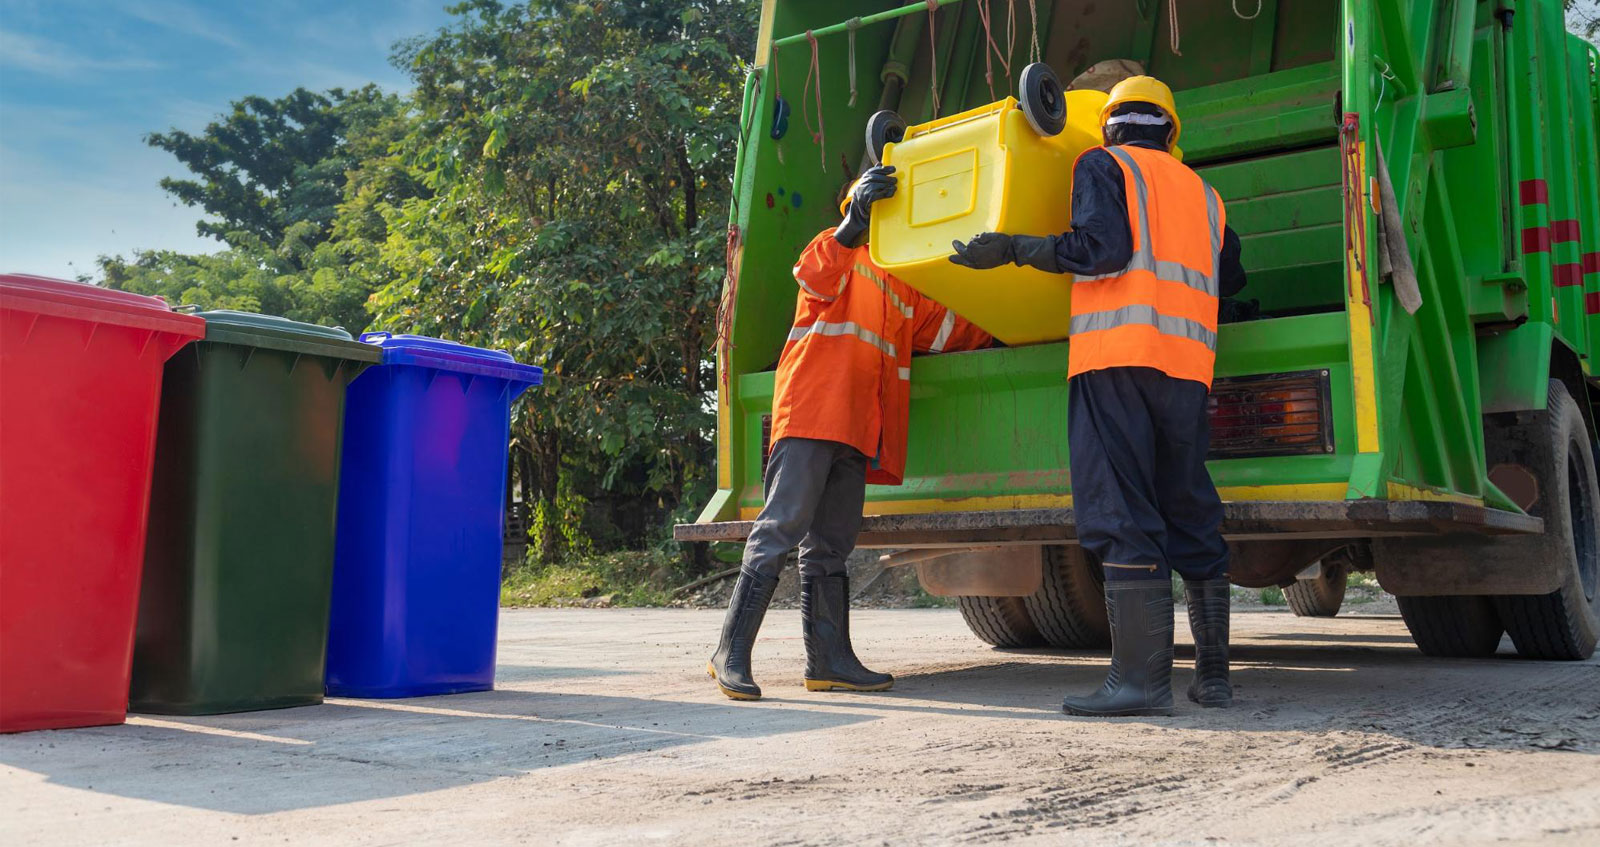 Top waste management companies